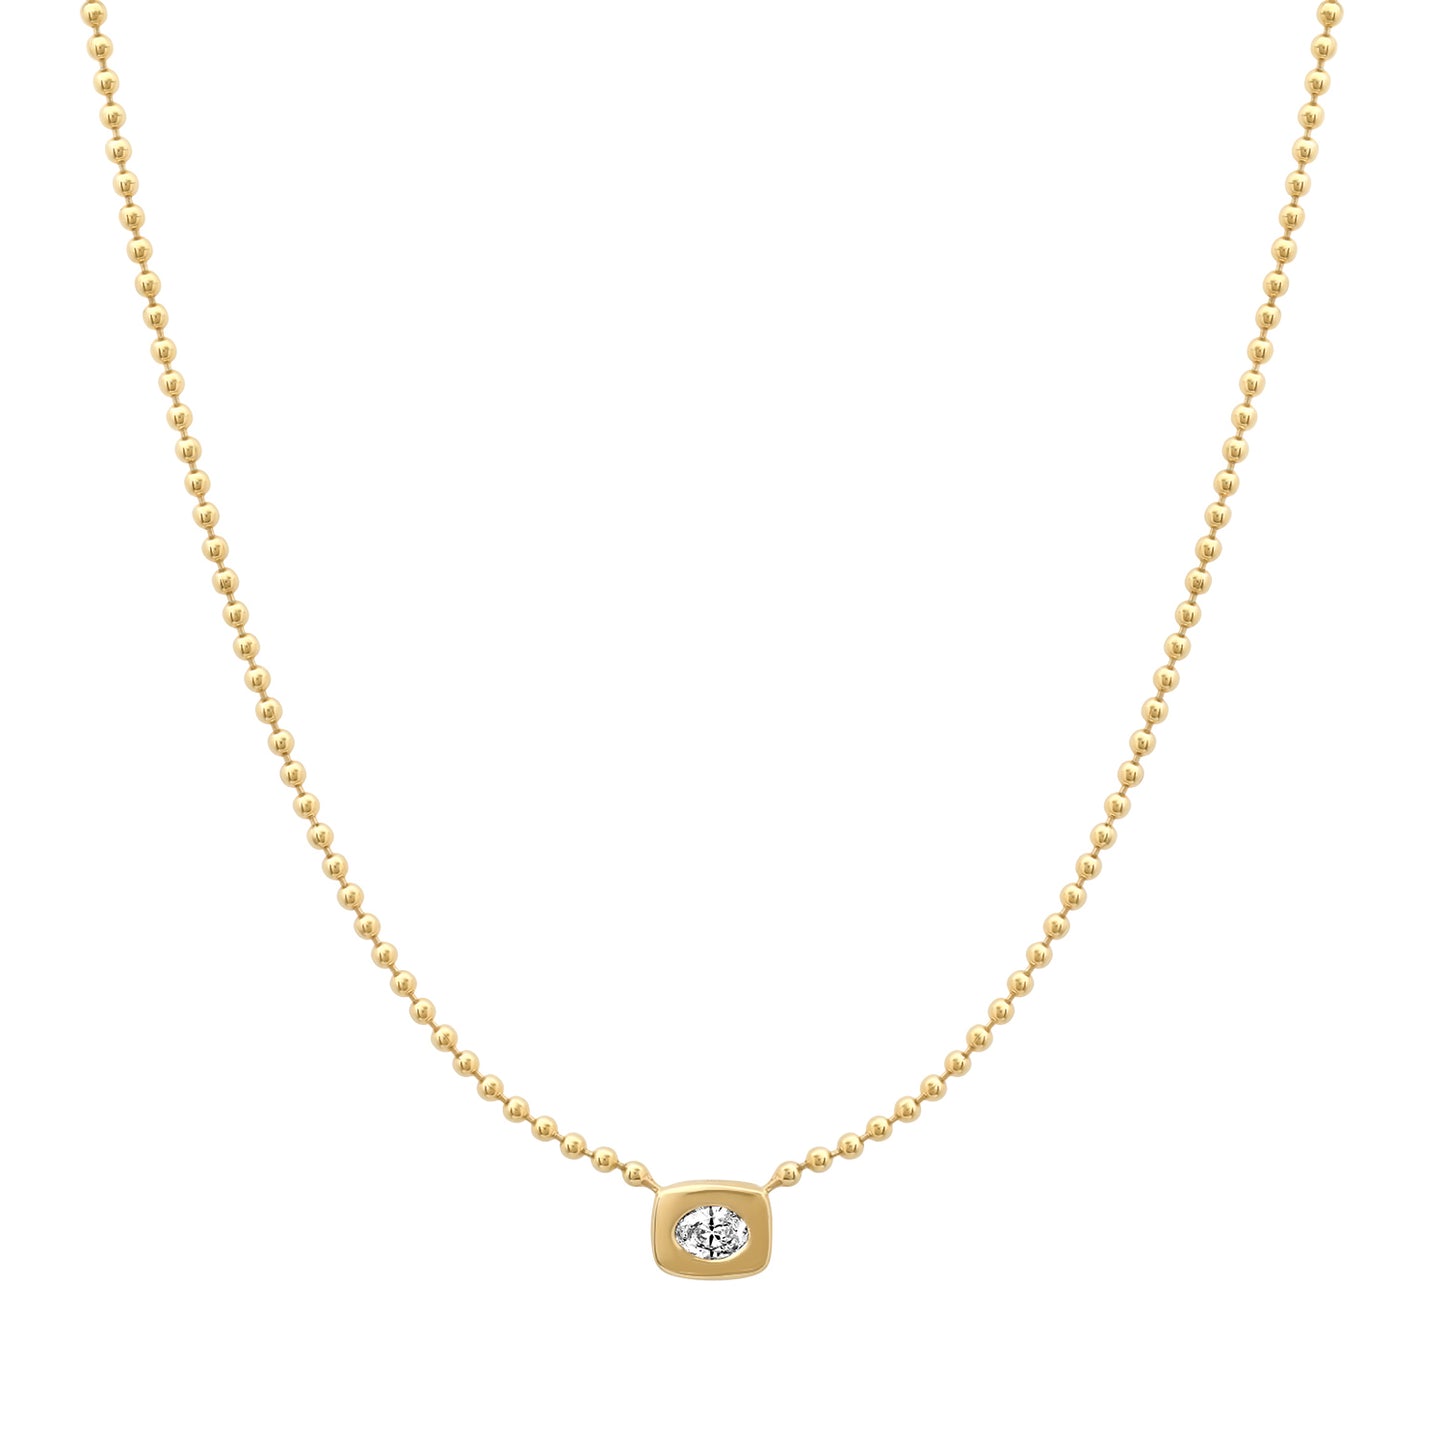 14K YG Oval Diamond Solitaire Necklace